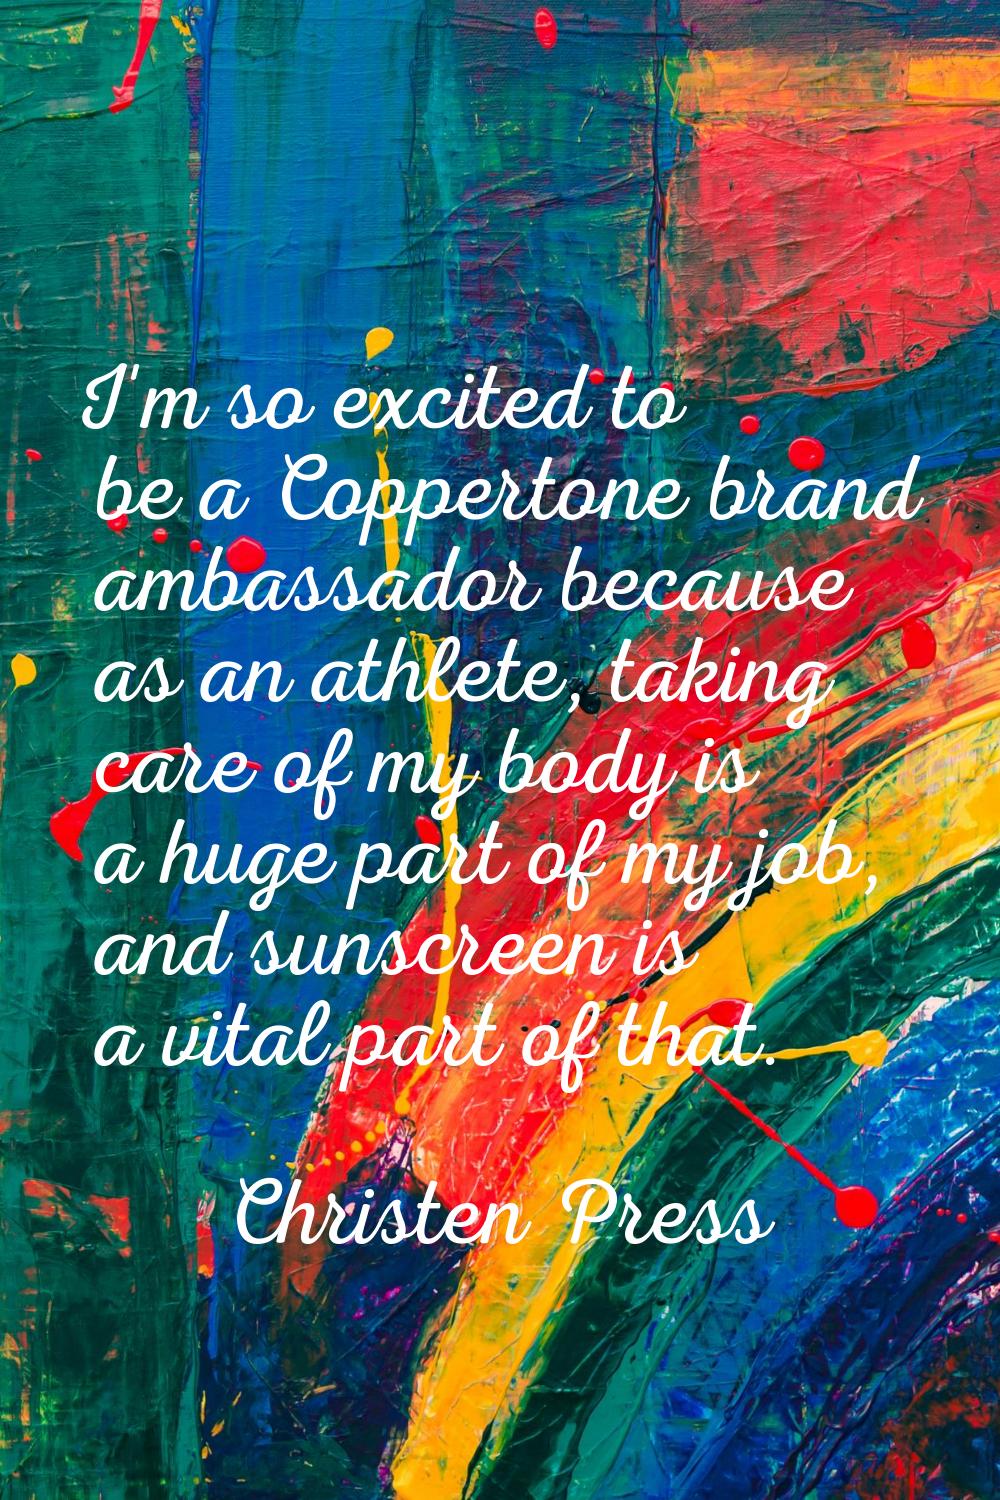 I'm so excited to be a Coppertone brand ambassador because as an athlete, taking care of my body is